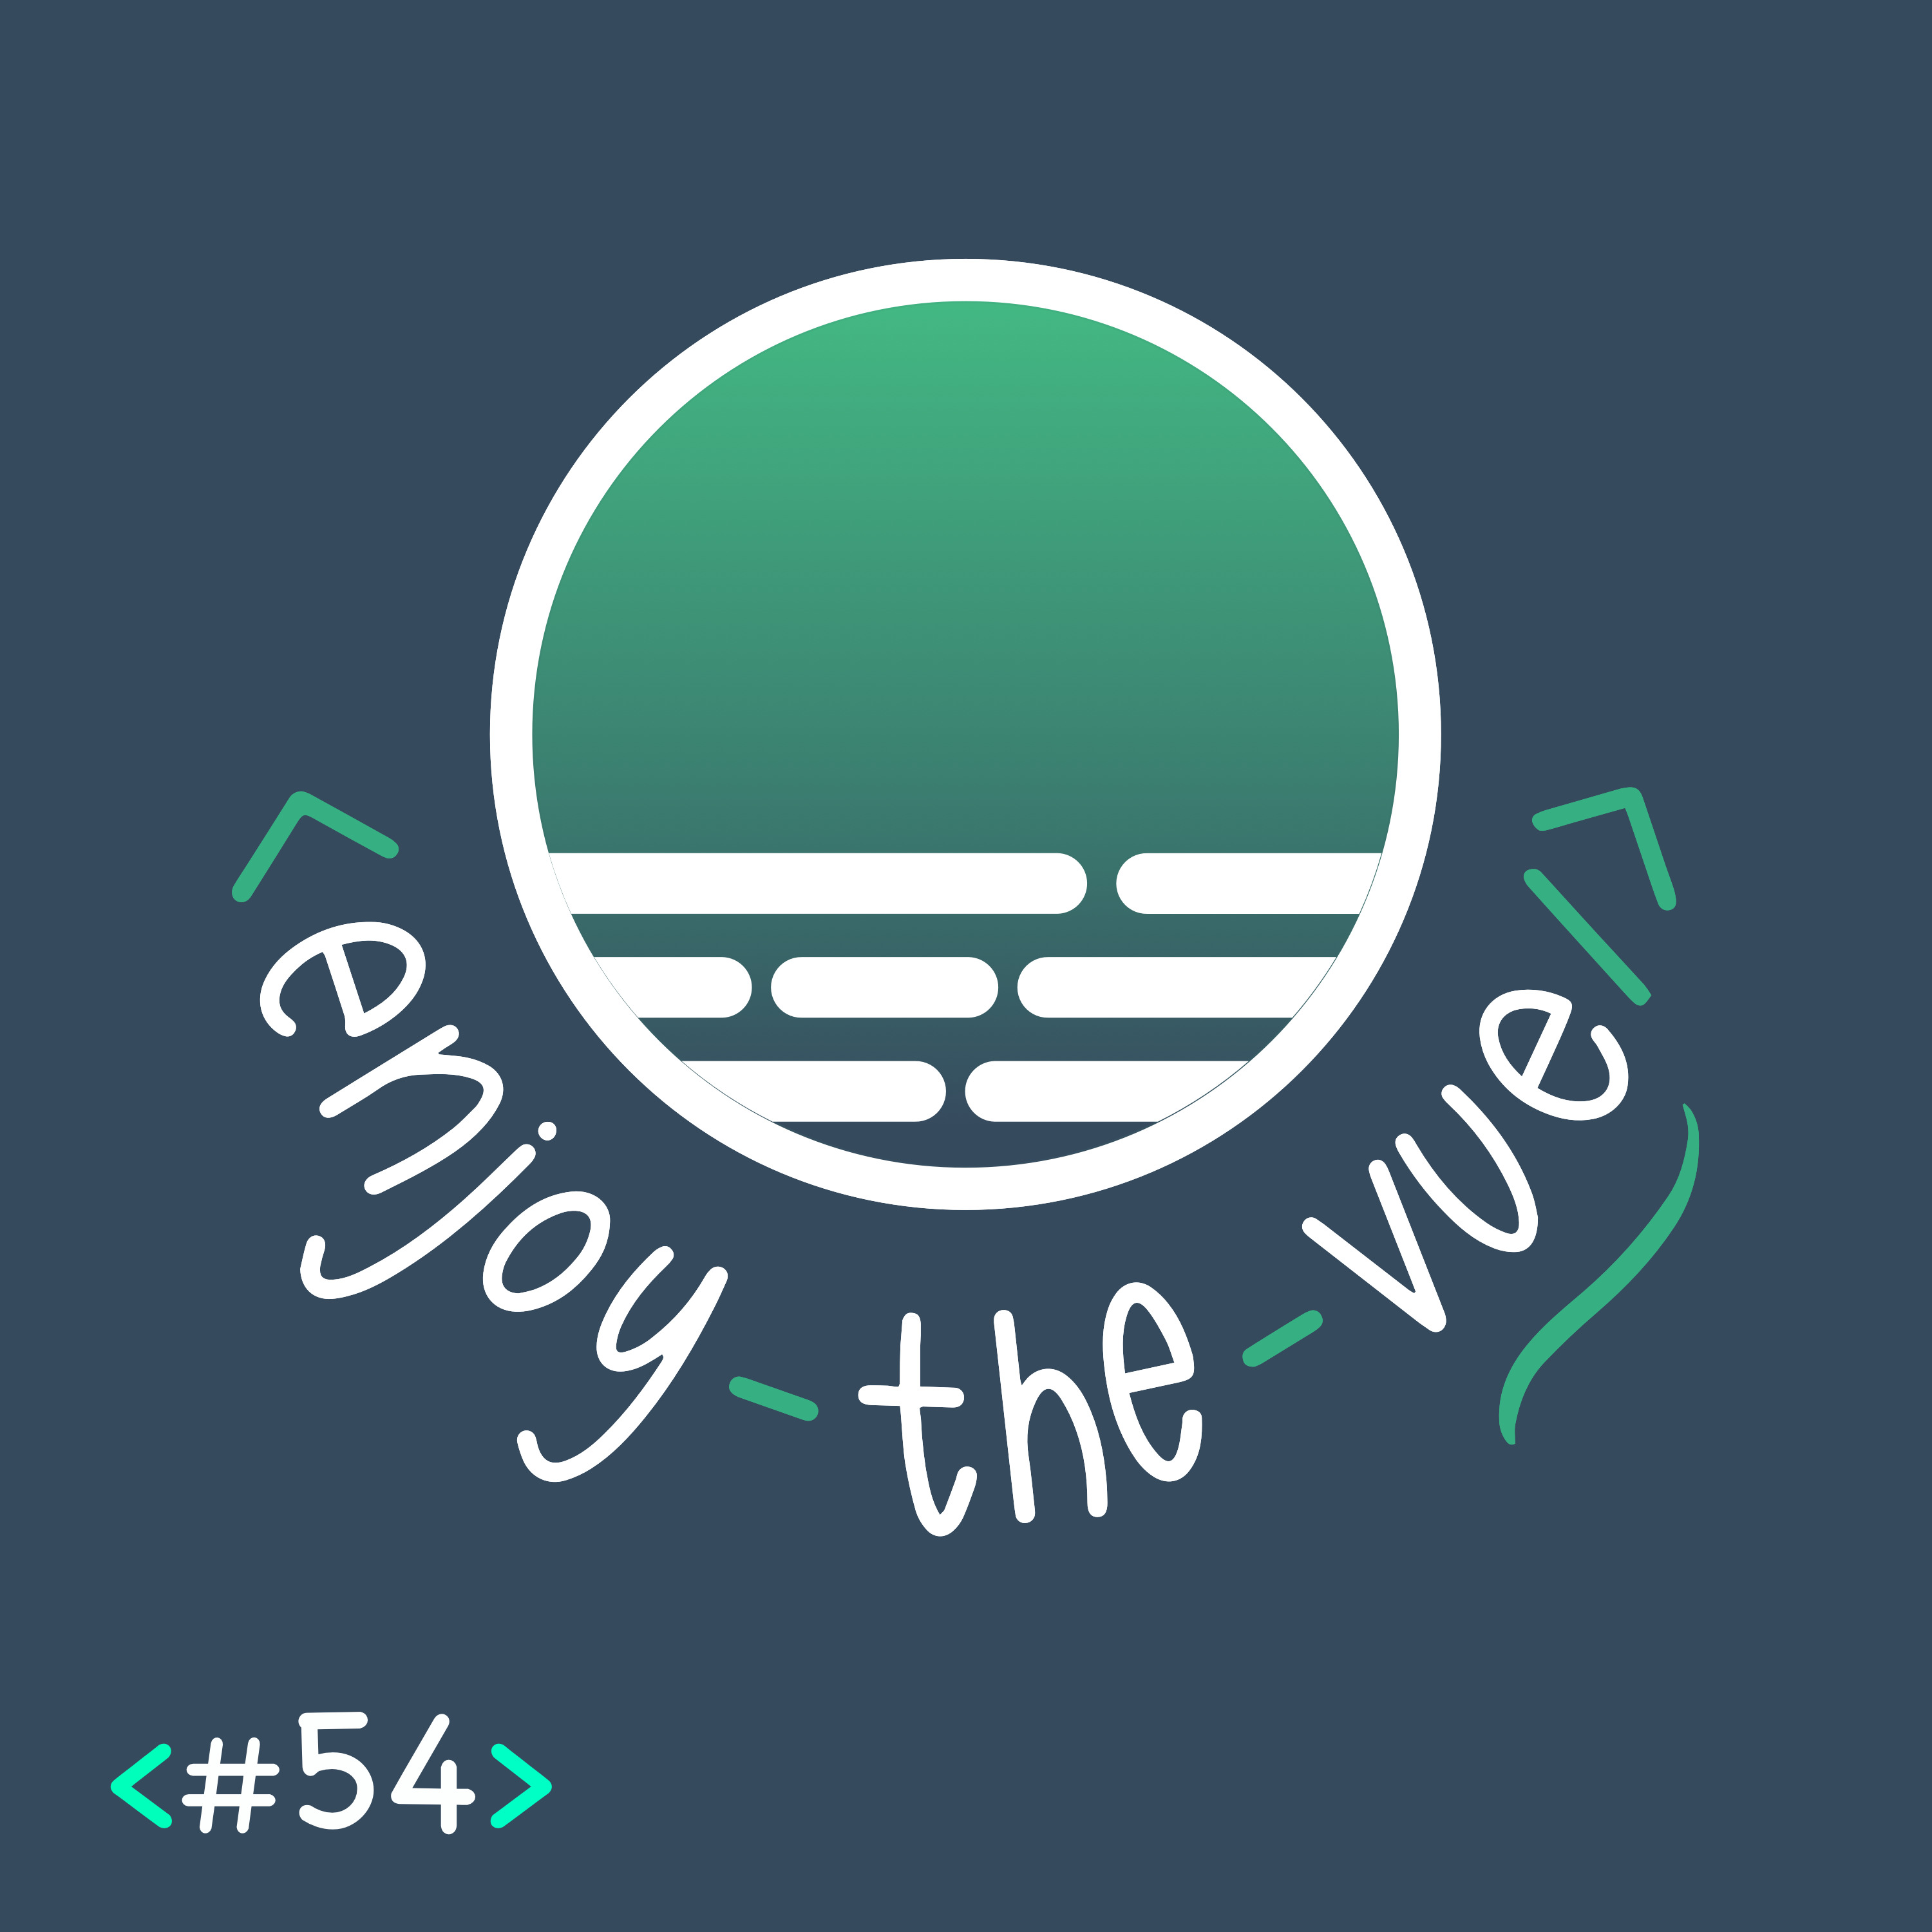 Episode 54: New in Vue 3 Ecosystem: Vuelidate, FormVueLate, Global-Vue-Events, & The Official Vue News with Damian Dulisz